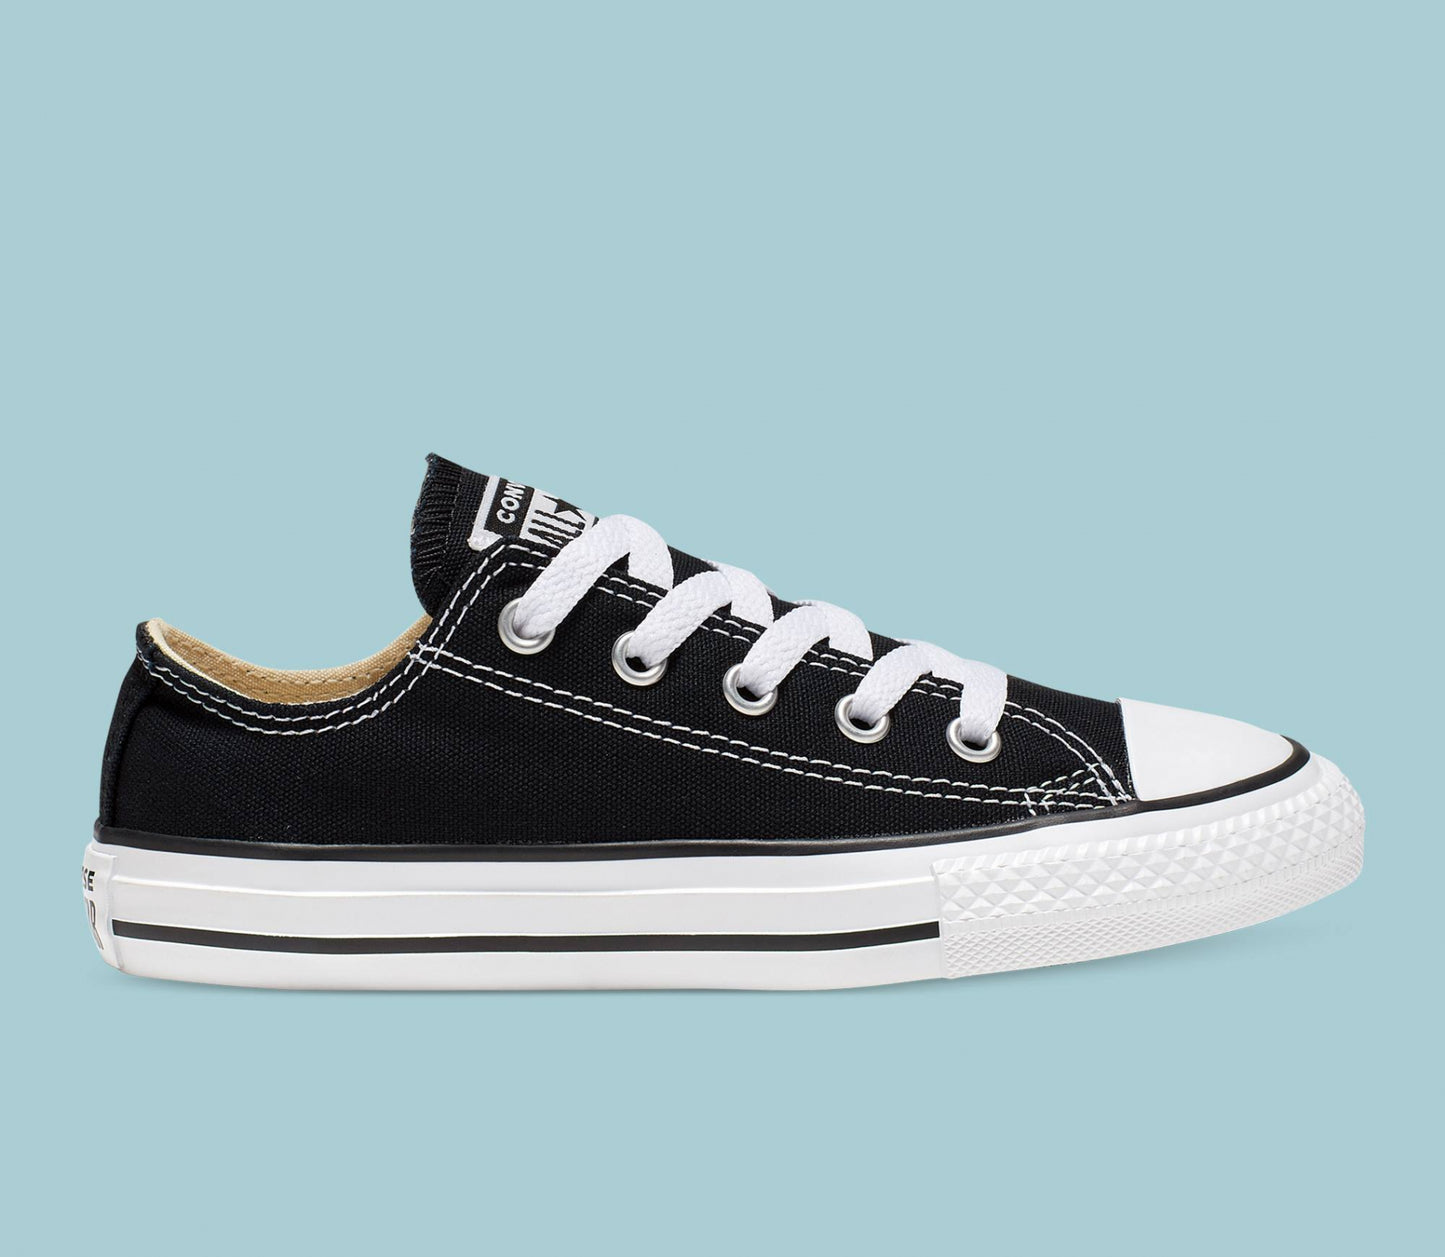 CONVERSE Chuck Taylor All Star Youth Low Shoe - Black - VENUE.